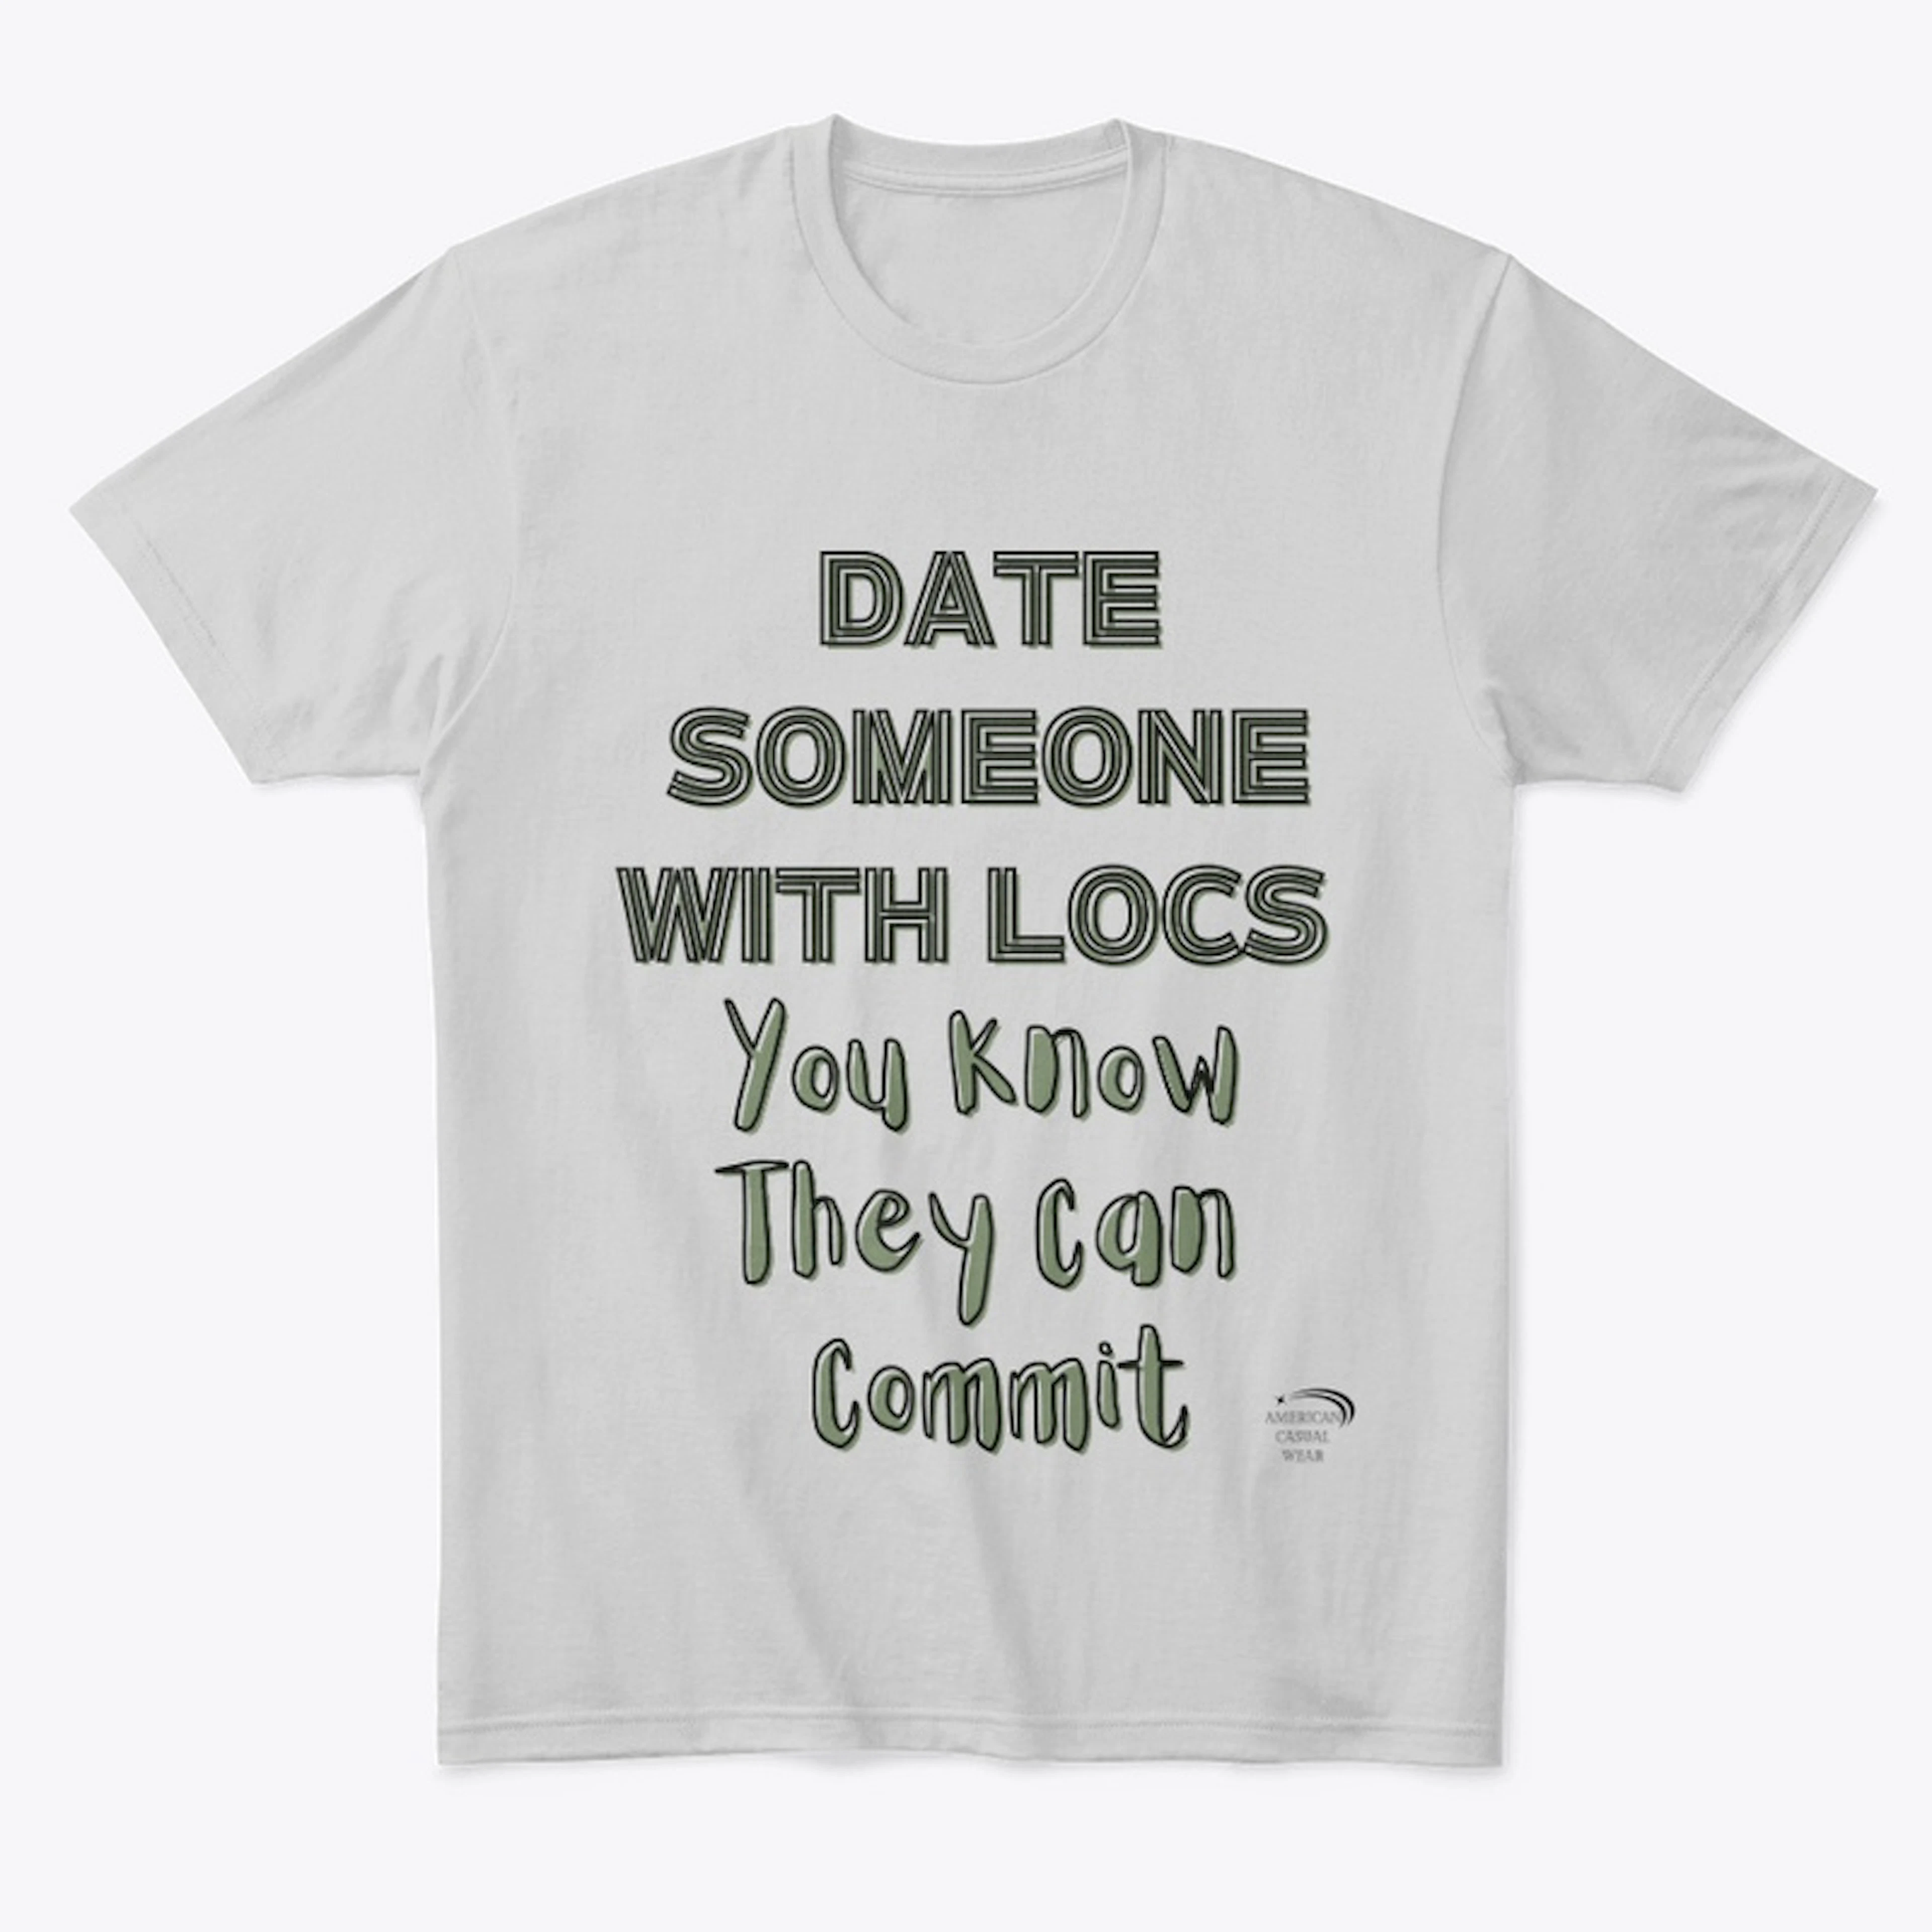 Date someone with locs